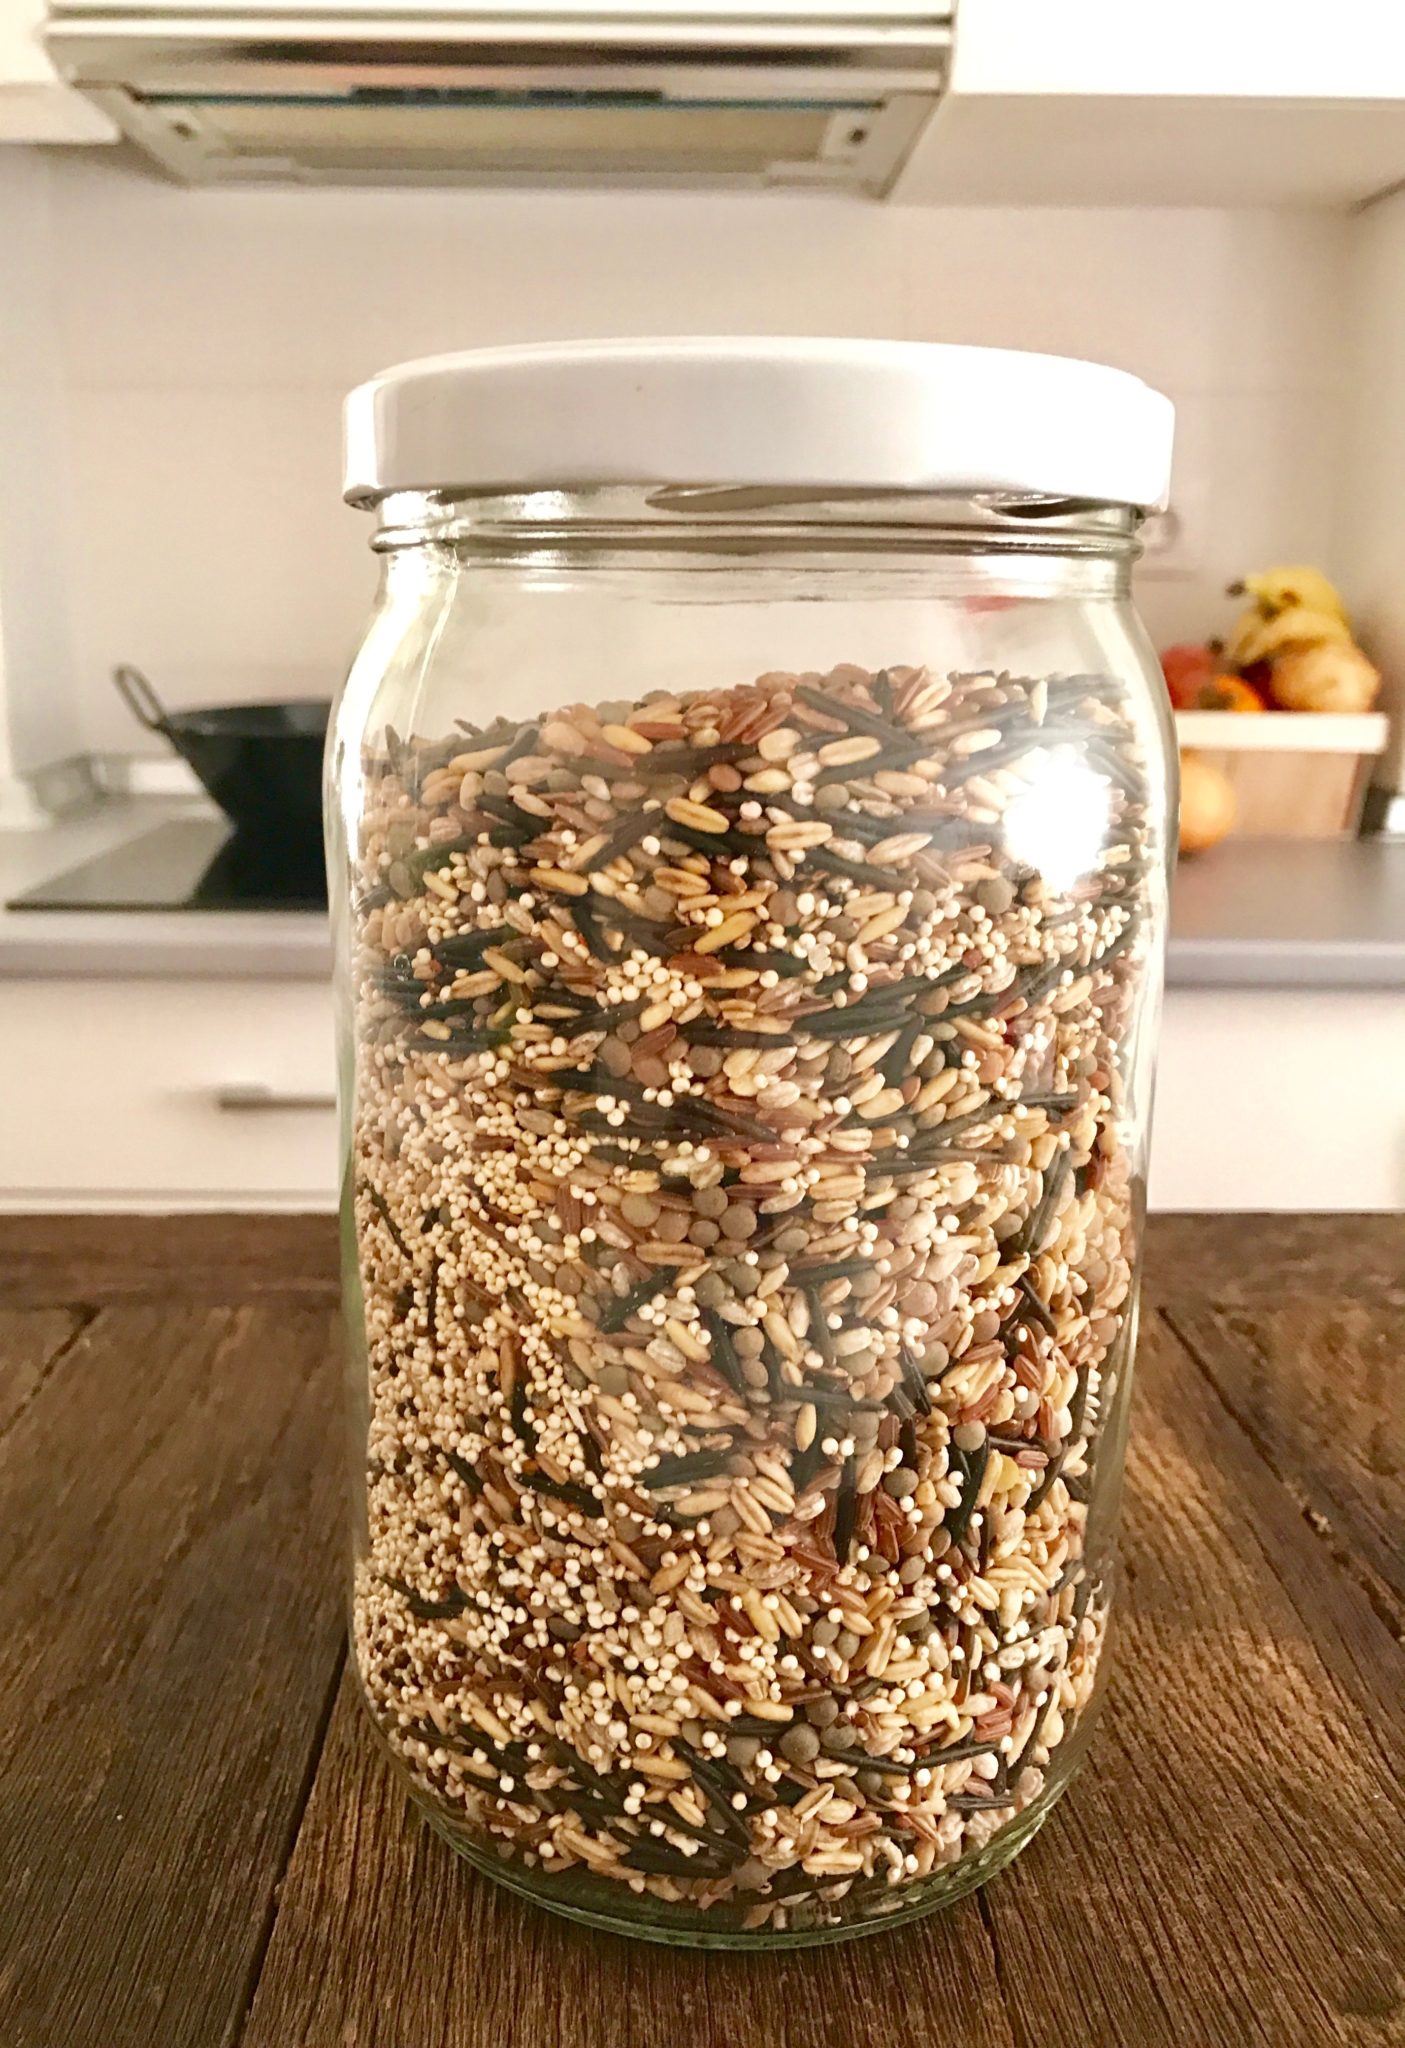 Combining the grains of choice together and store them in a storing jar